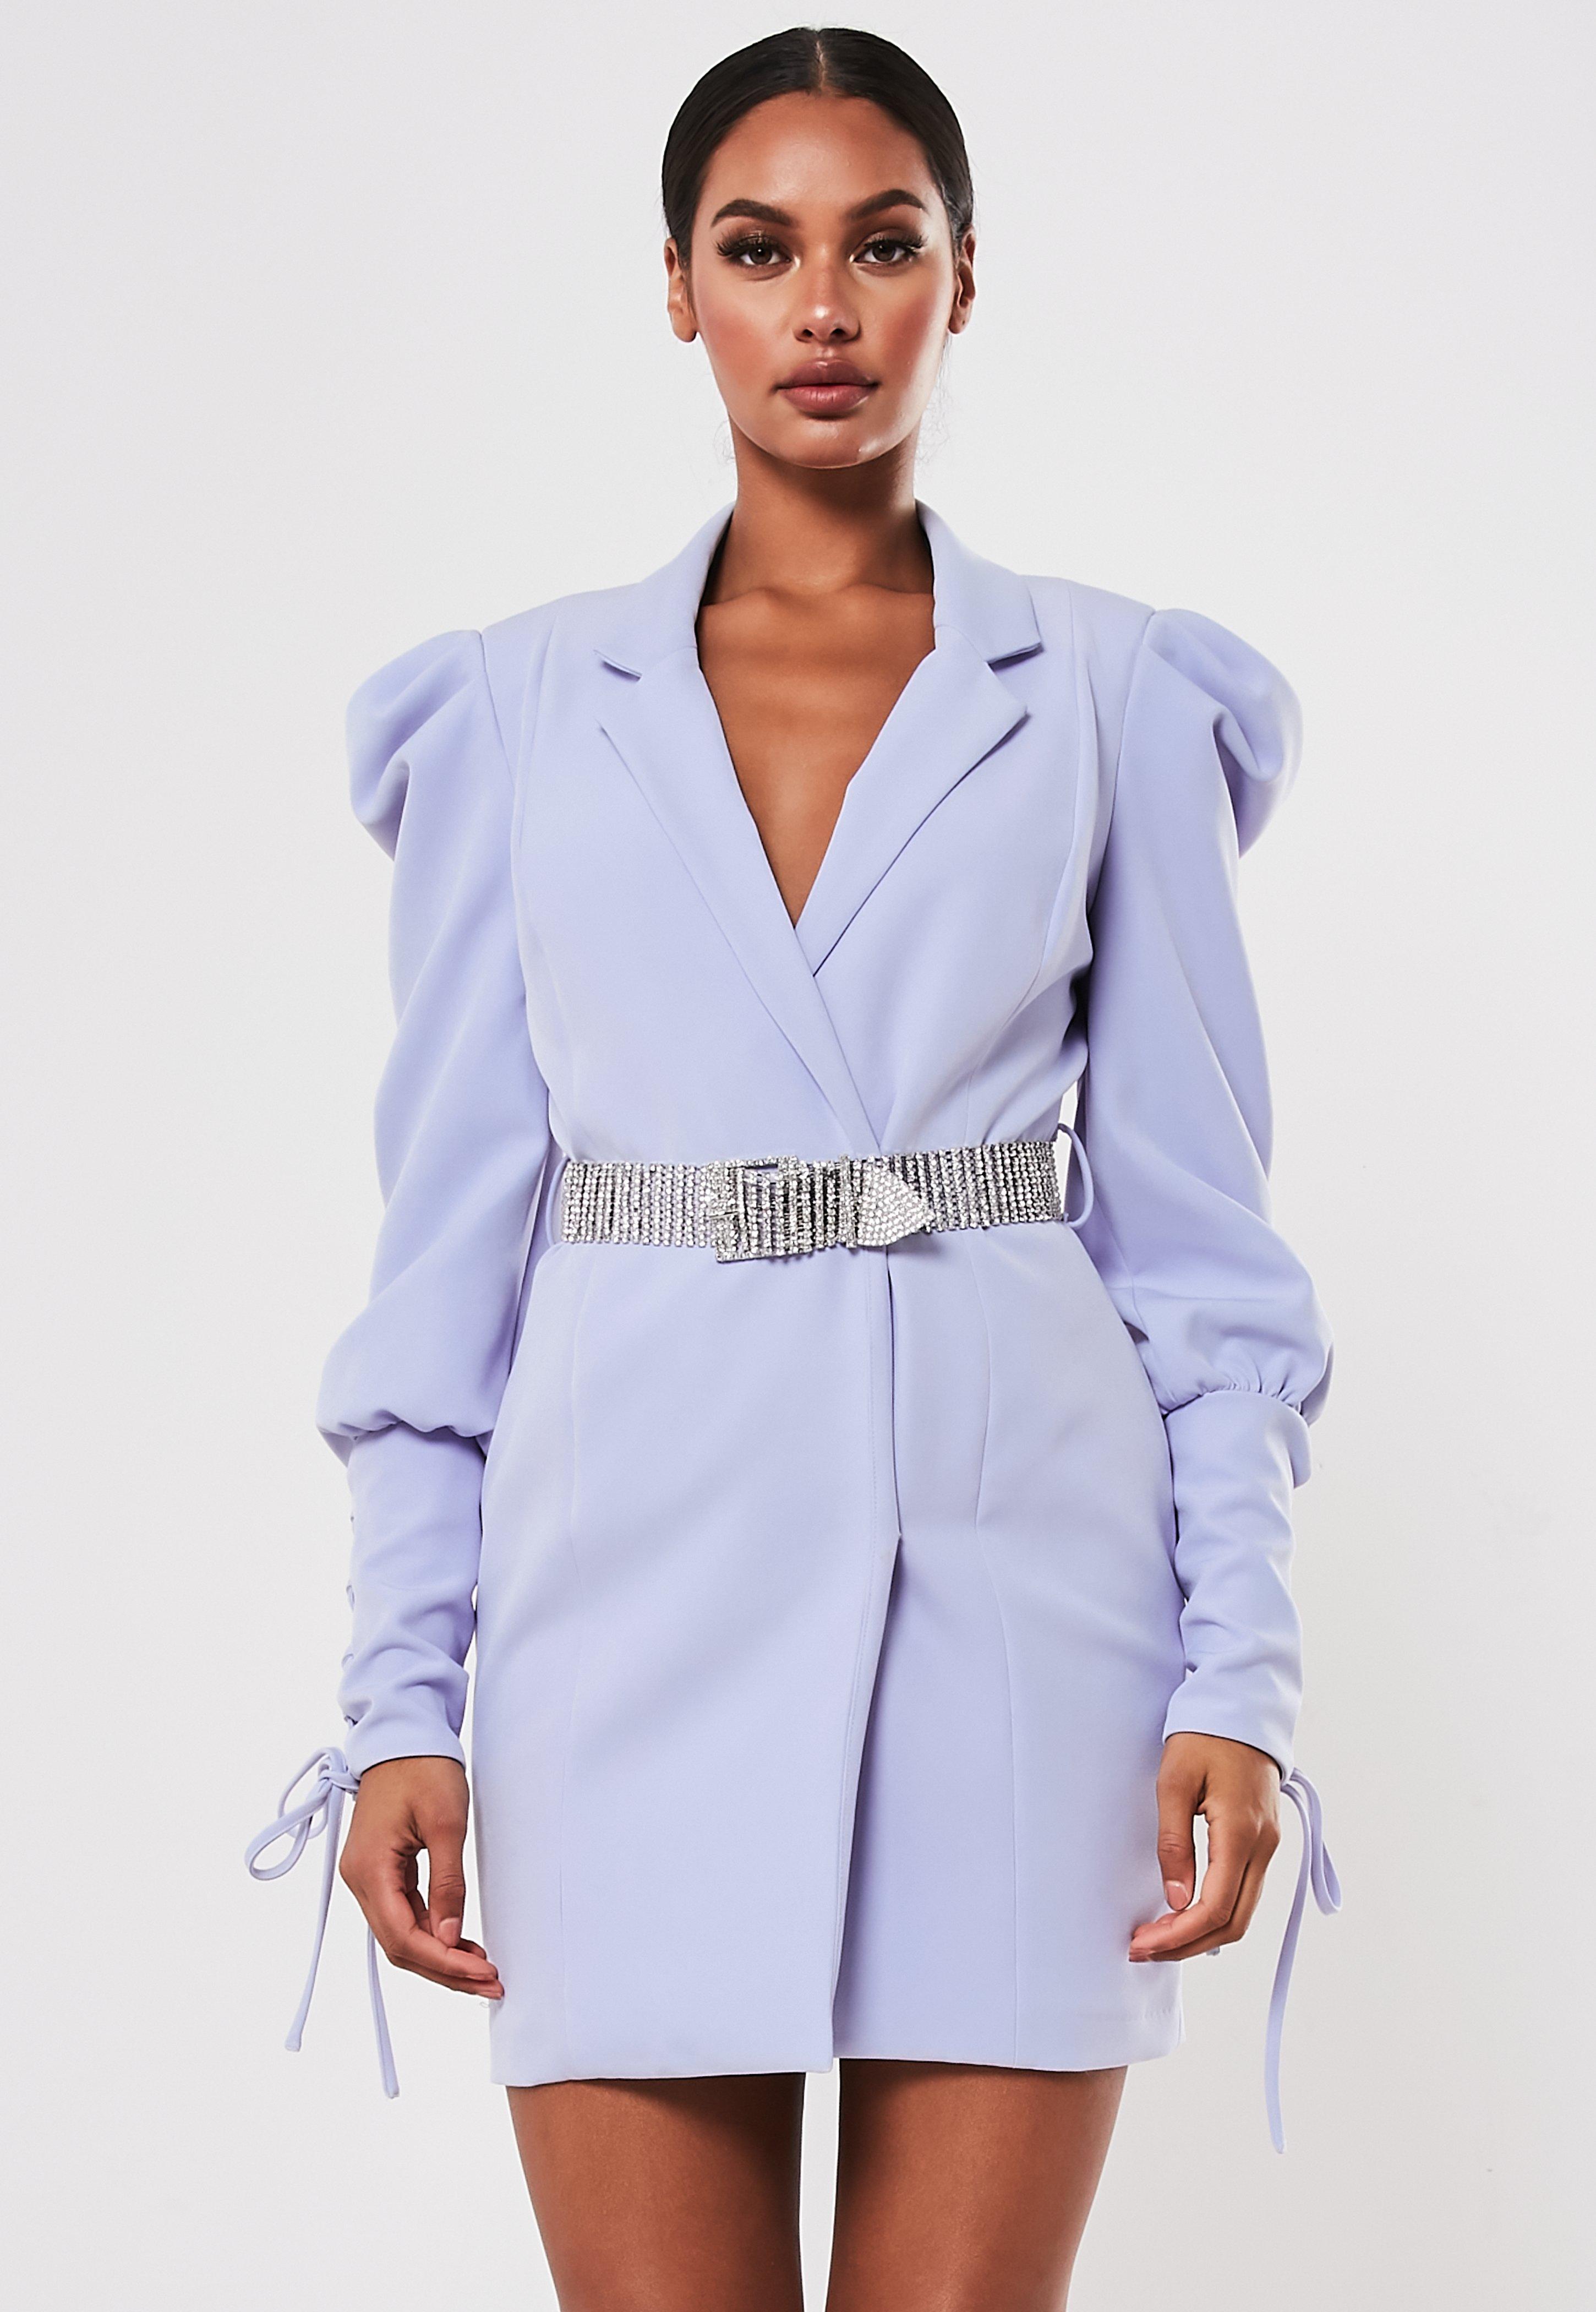 Missguided Peace and Love Lilac Embellished Belt Blazer Dress Without Belt